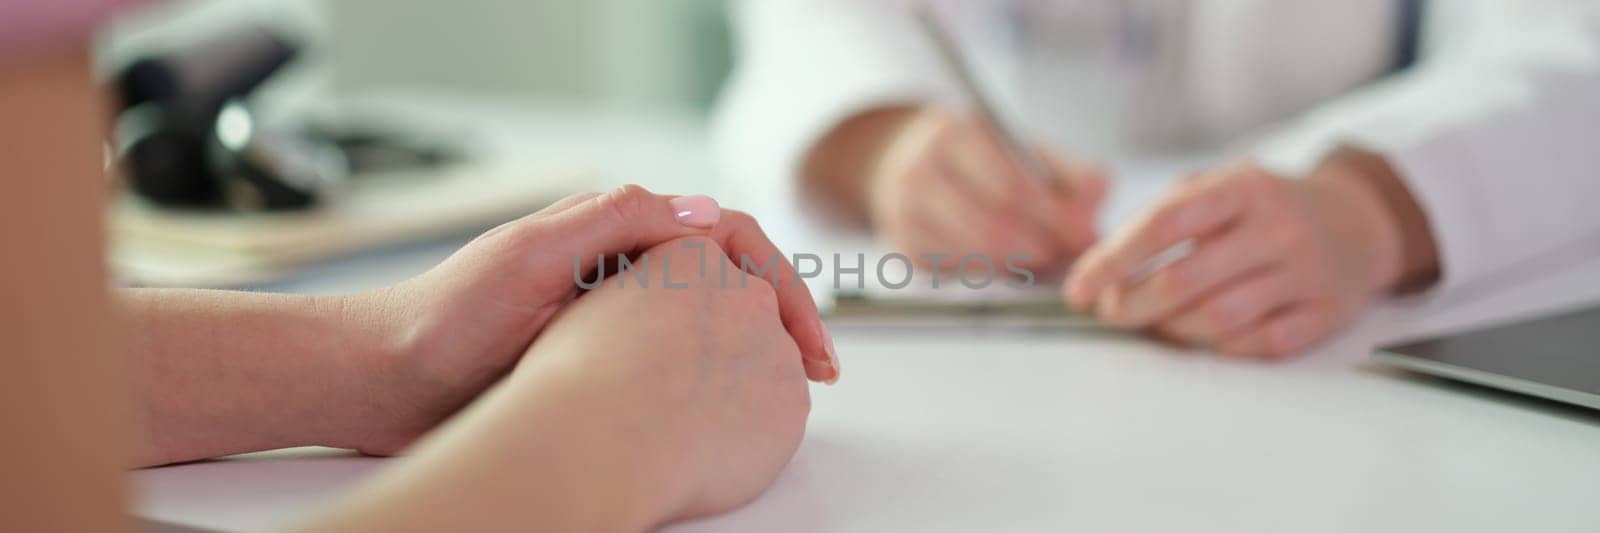 Patient hands on table during visit to doctor in clinic closeup by kuprevich